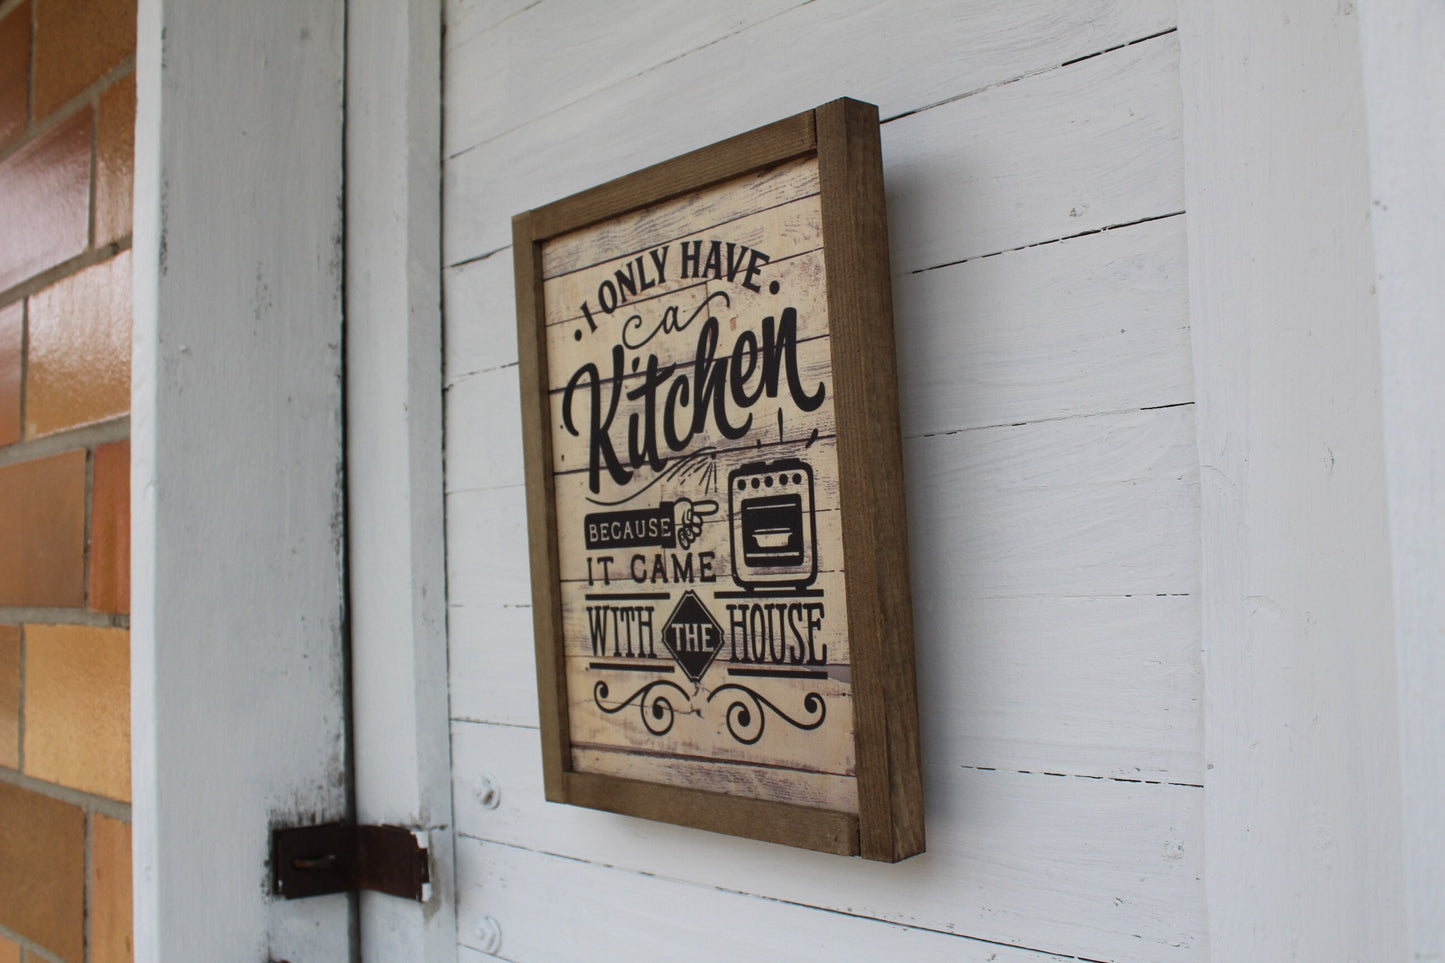 Kitchen Wood Sign Joke I Only Have A Kitchen Because It Came With the House Rustic Pallet Farmhouse Primitive Wall Oven Scroll Art Décor